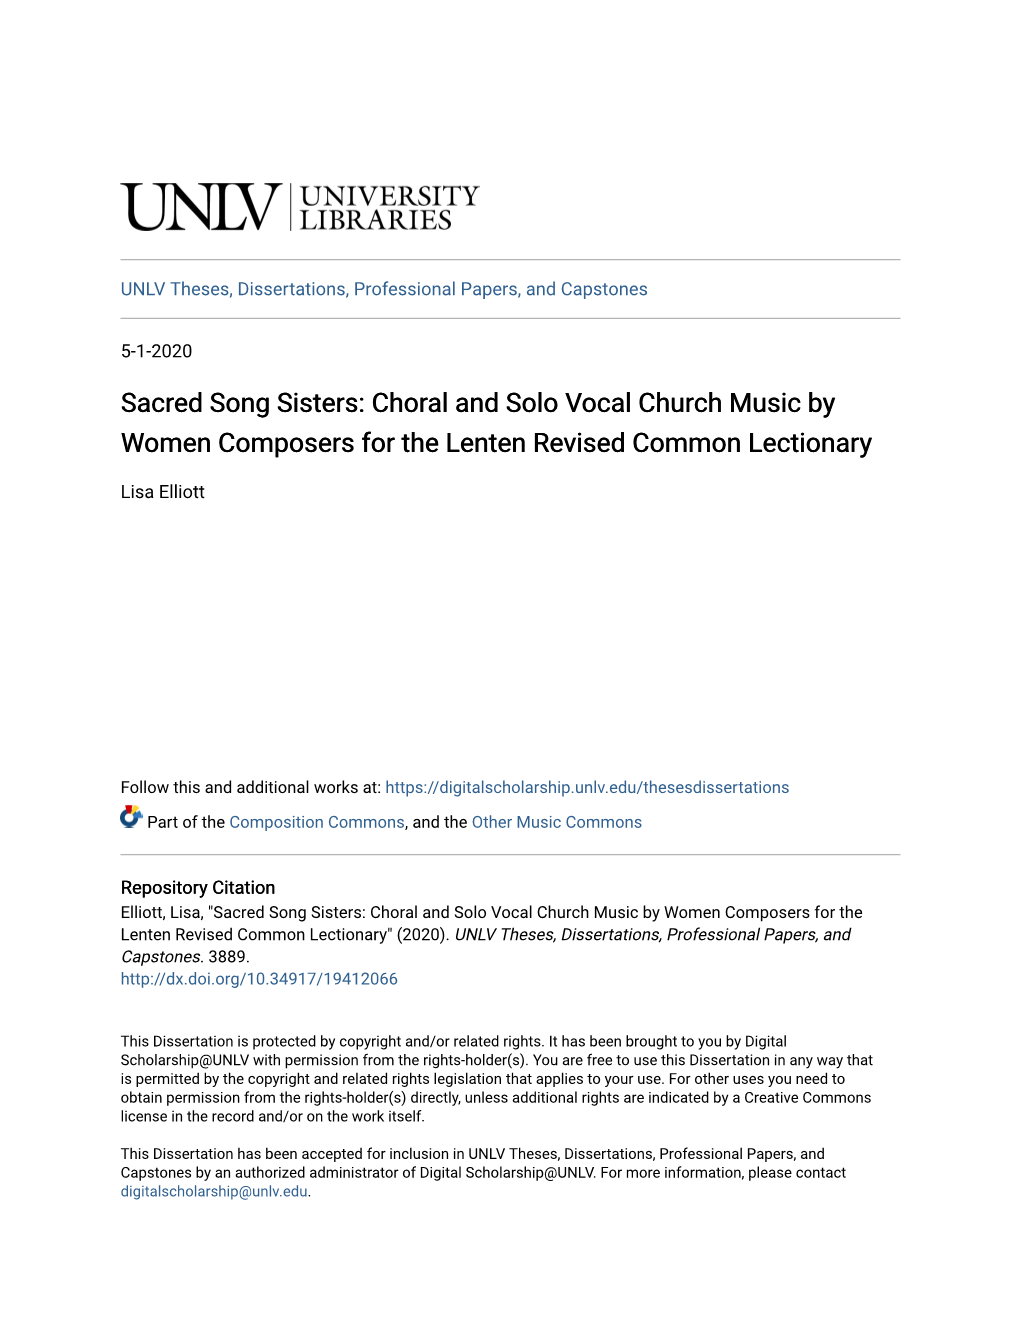 Sacred Song Sisters: Choral and Solo Vocal Church Music by Women Composers for the Lenten Revised Common Lectionary